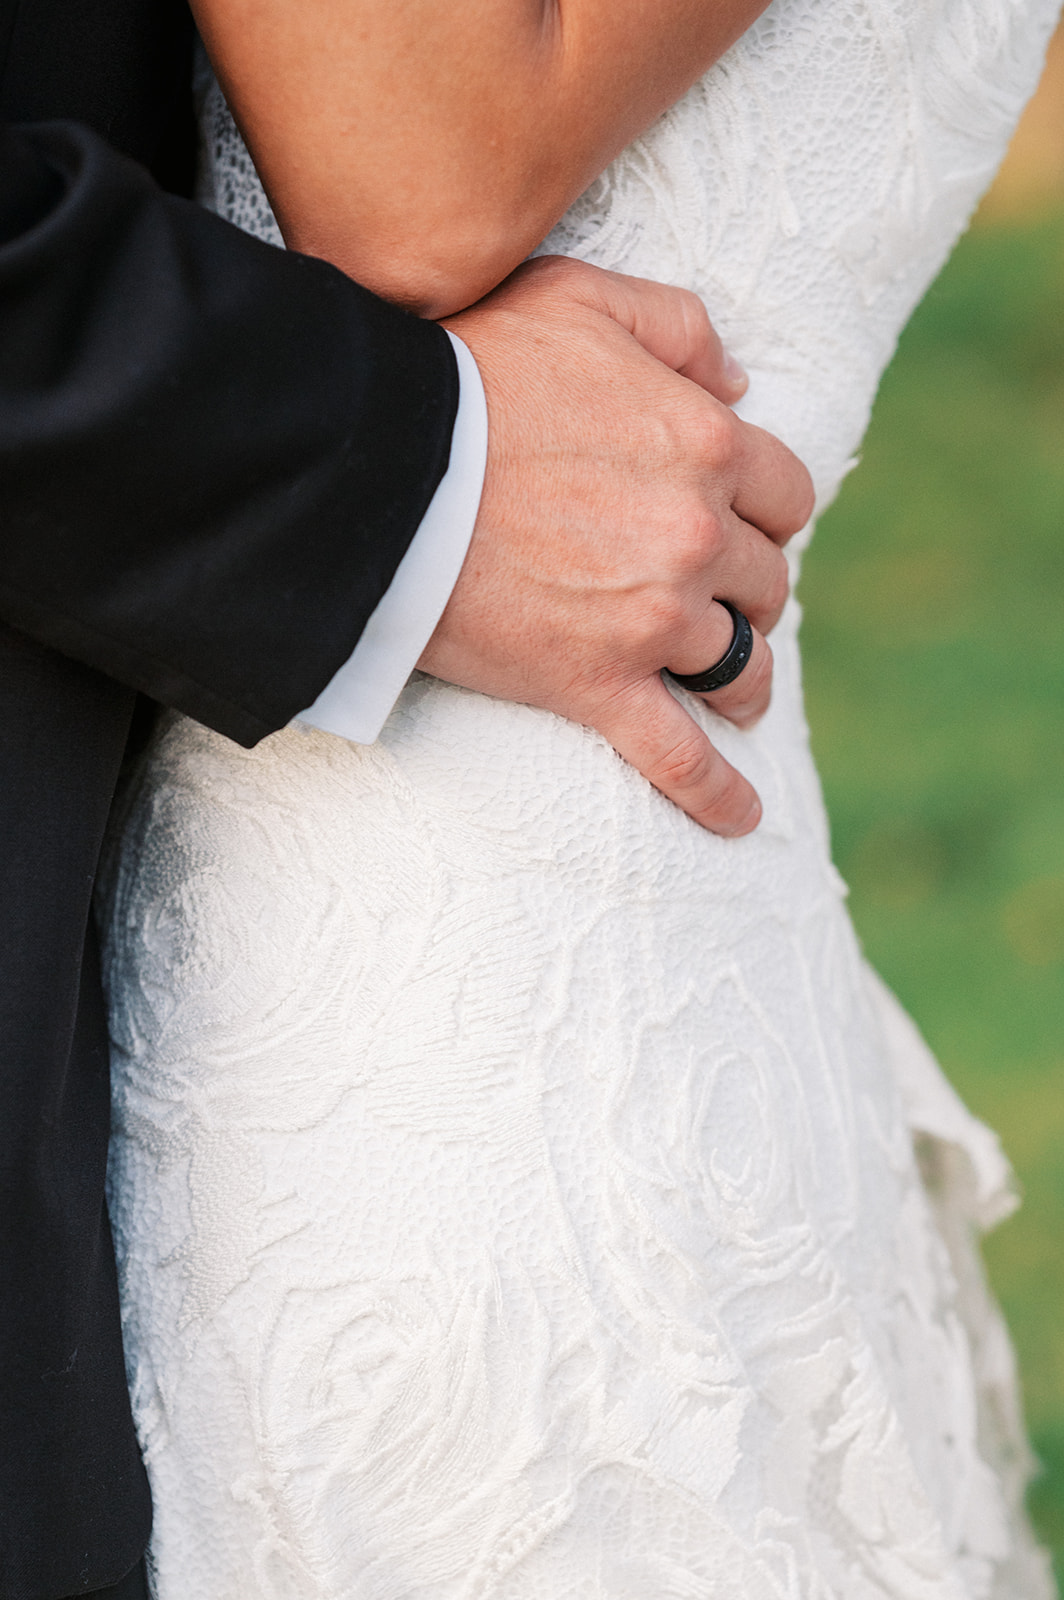 Details of a groom's hand on his bride's white lace dress at a Ravello East Hanover Wedding